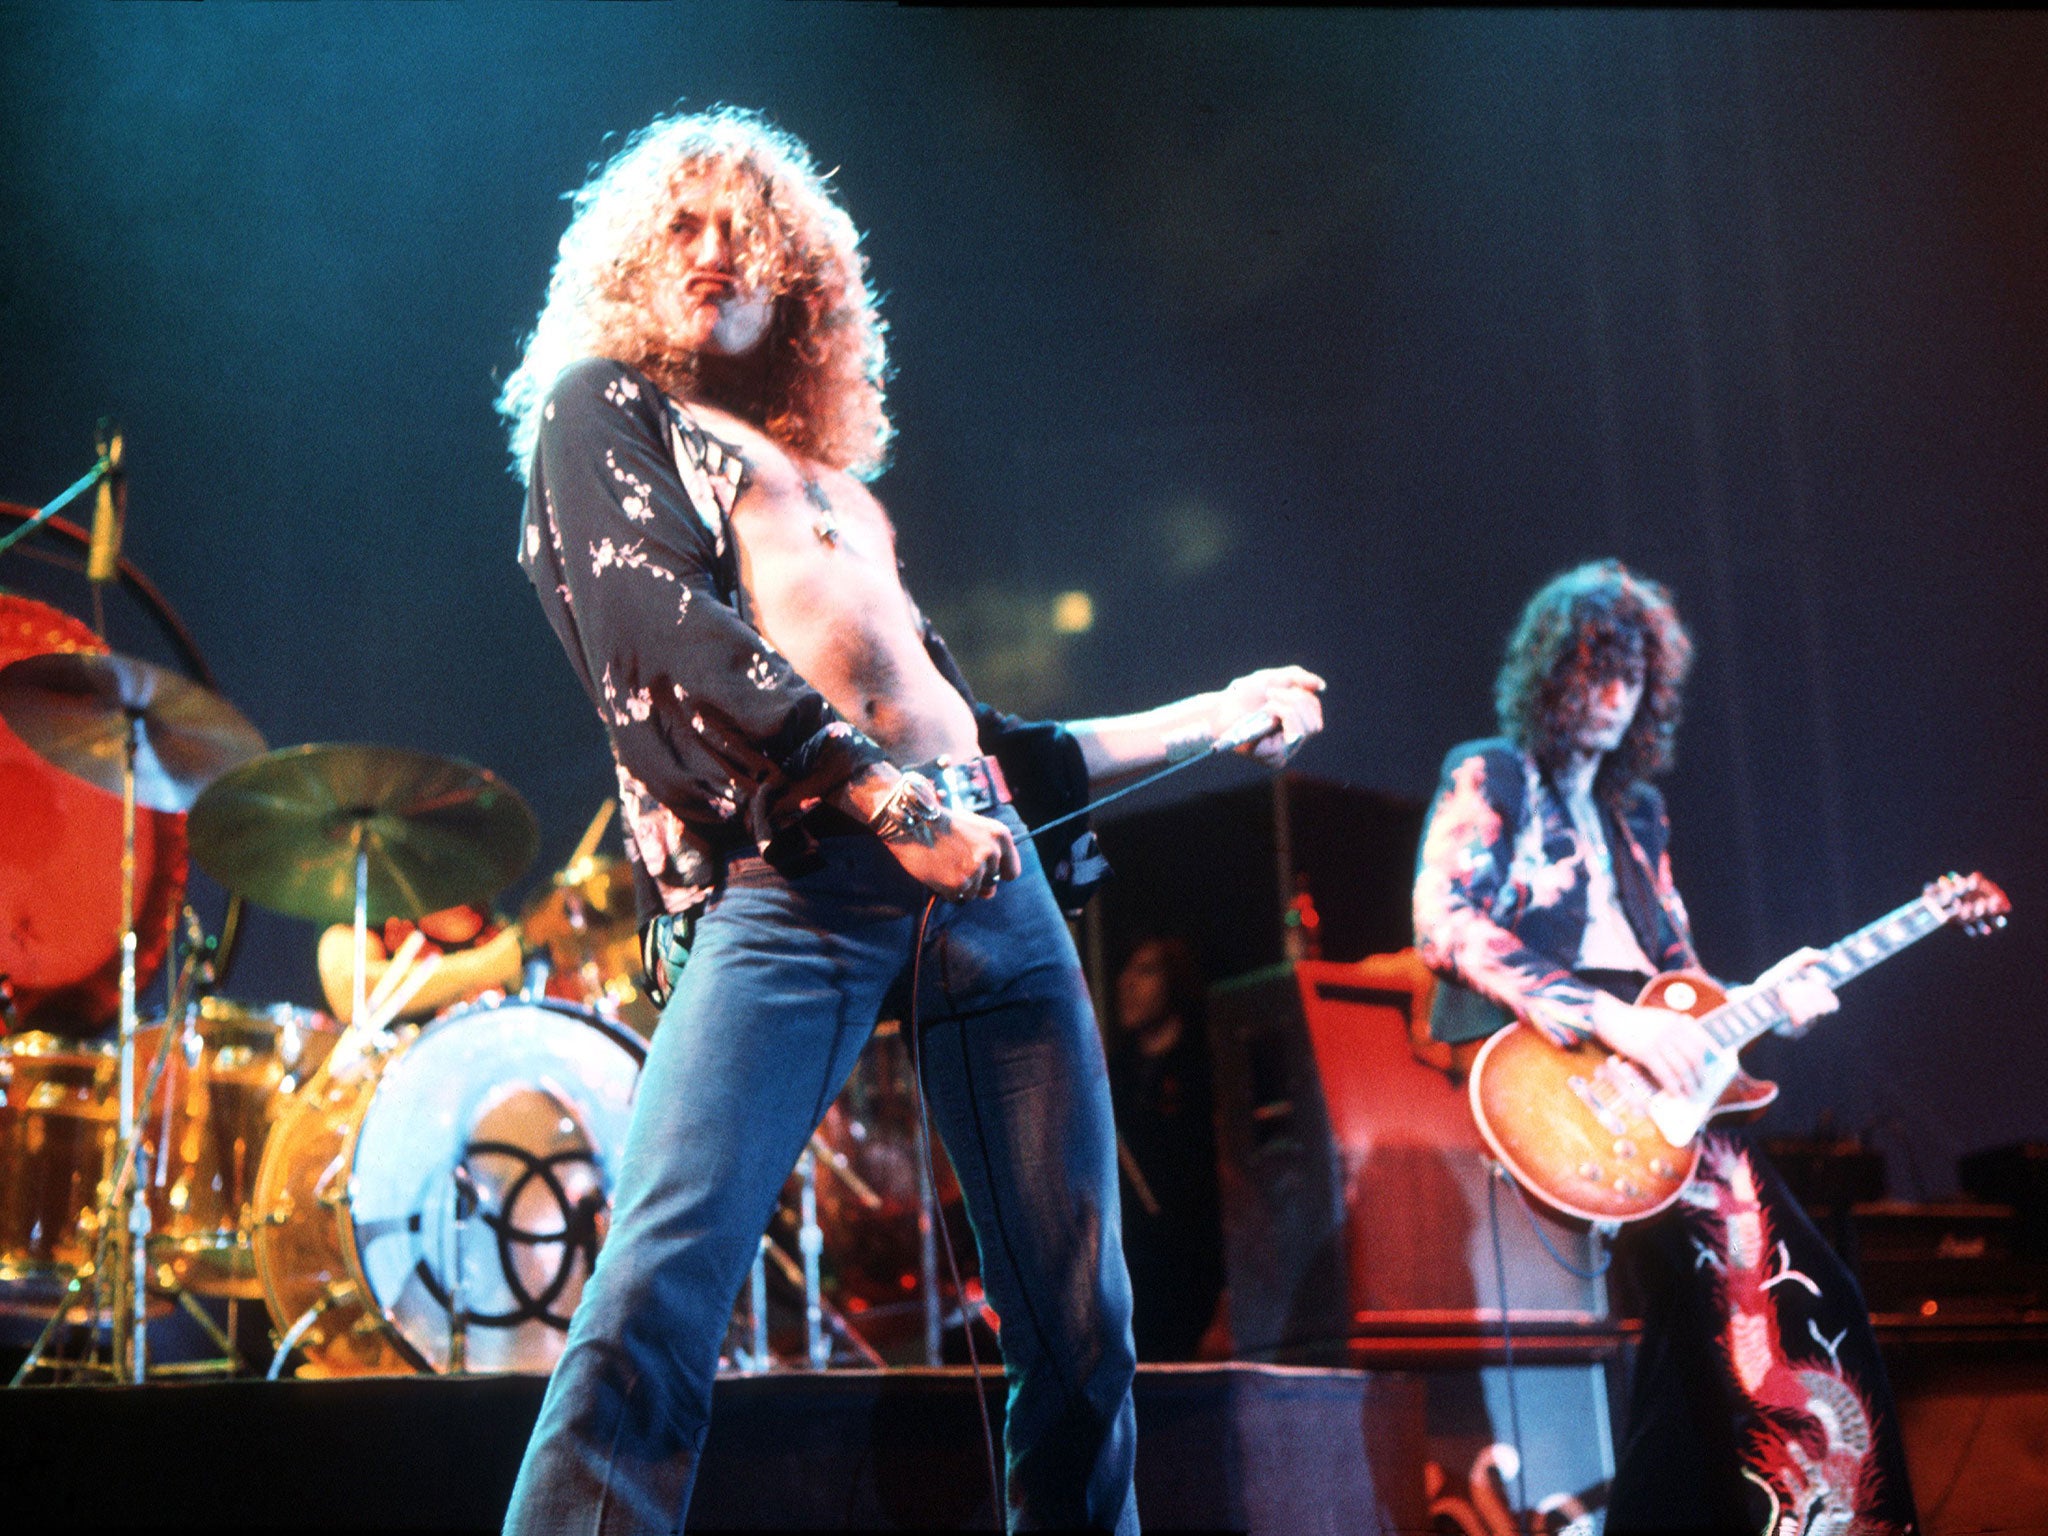 Led Zeppelin's 'Whole Lotta Love' has been voted the best guitar riff of all time